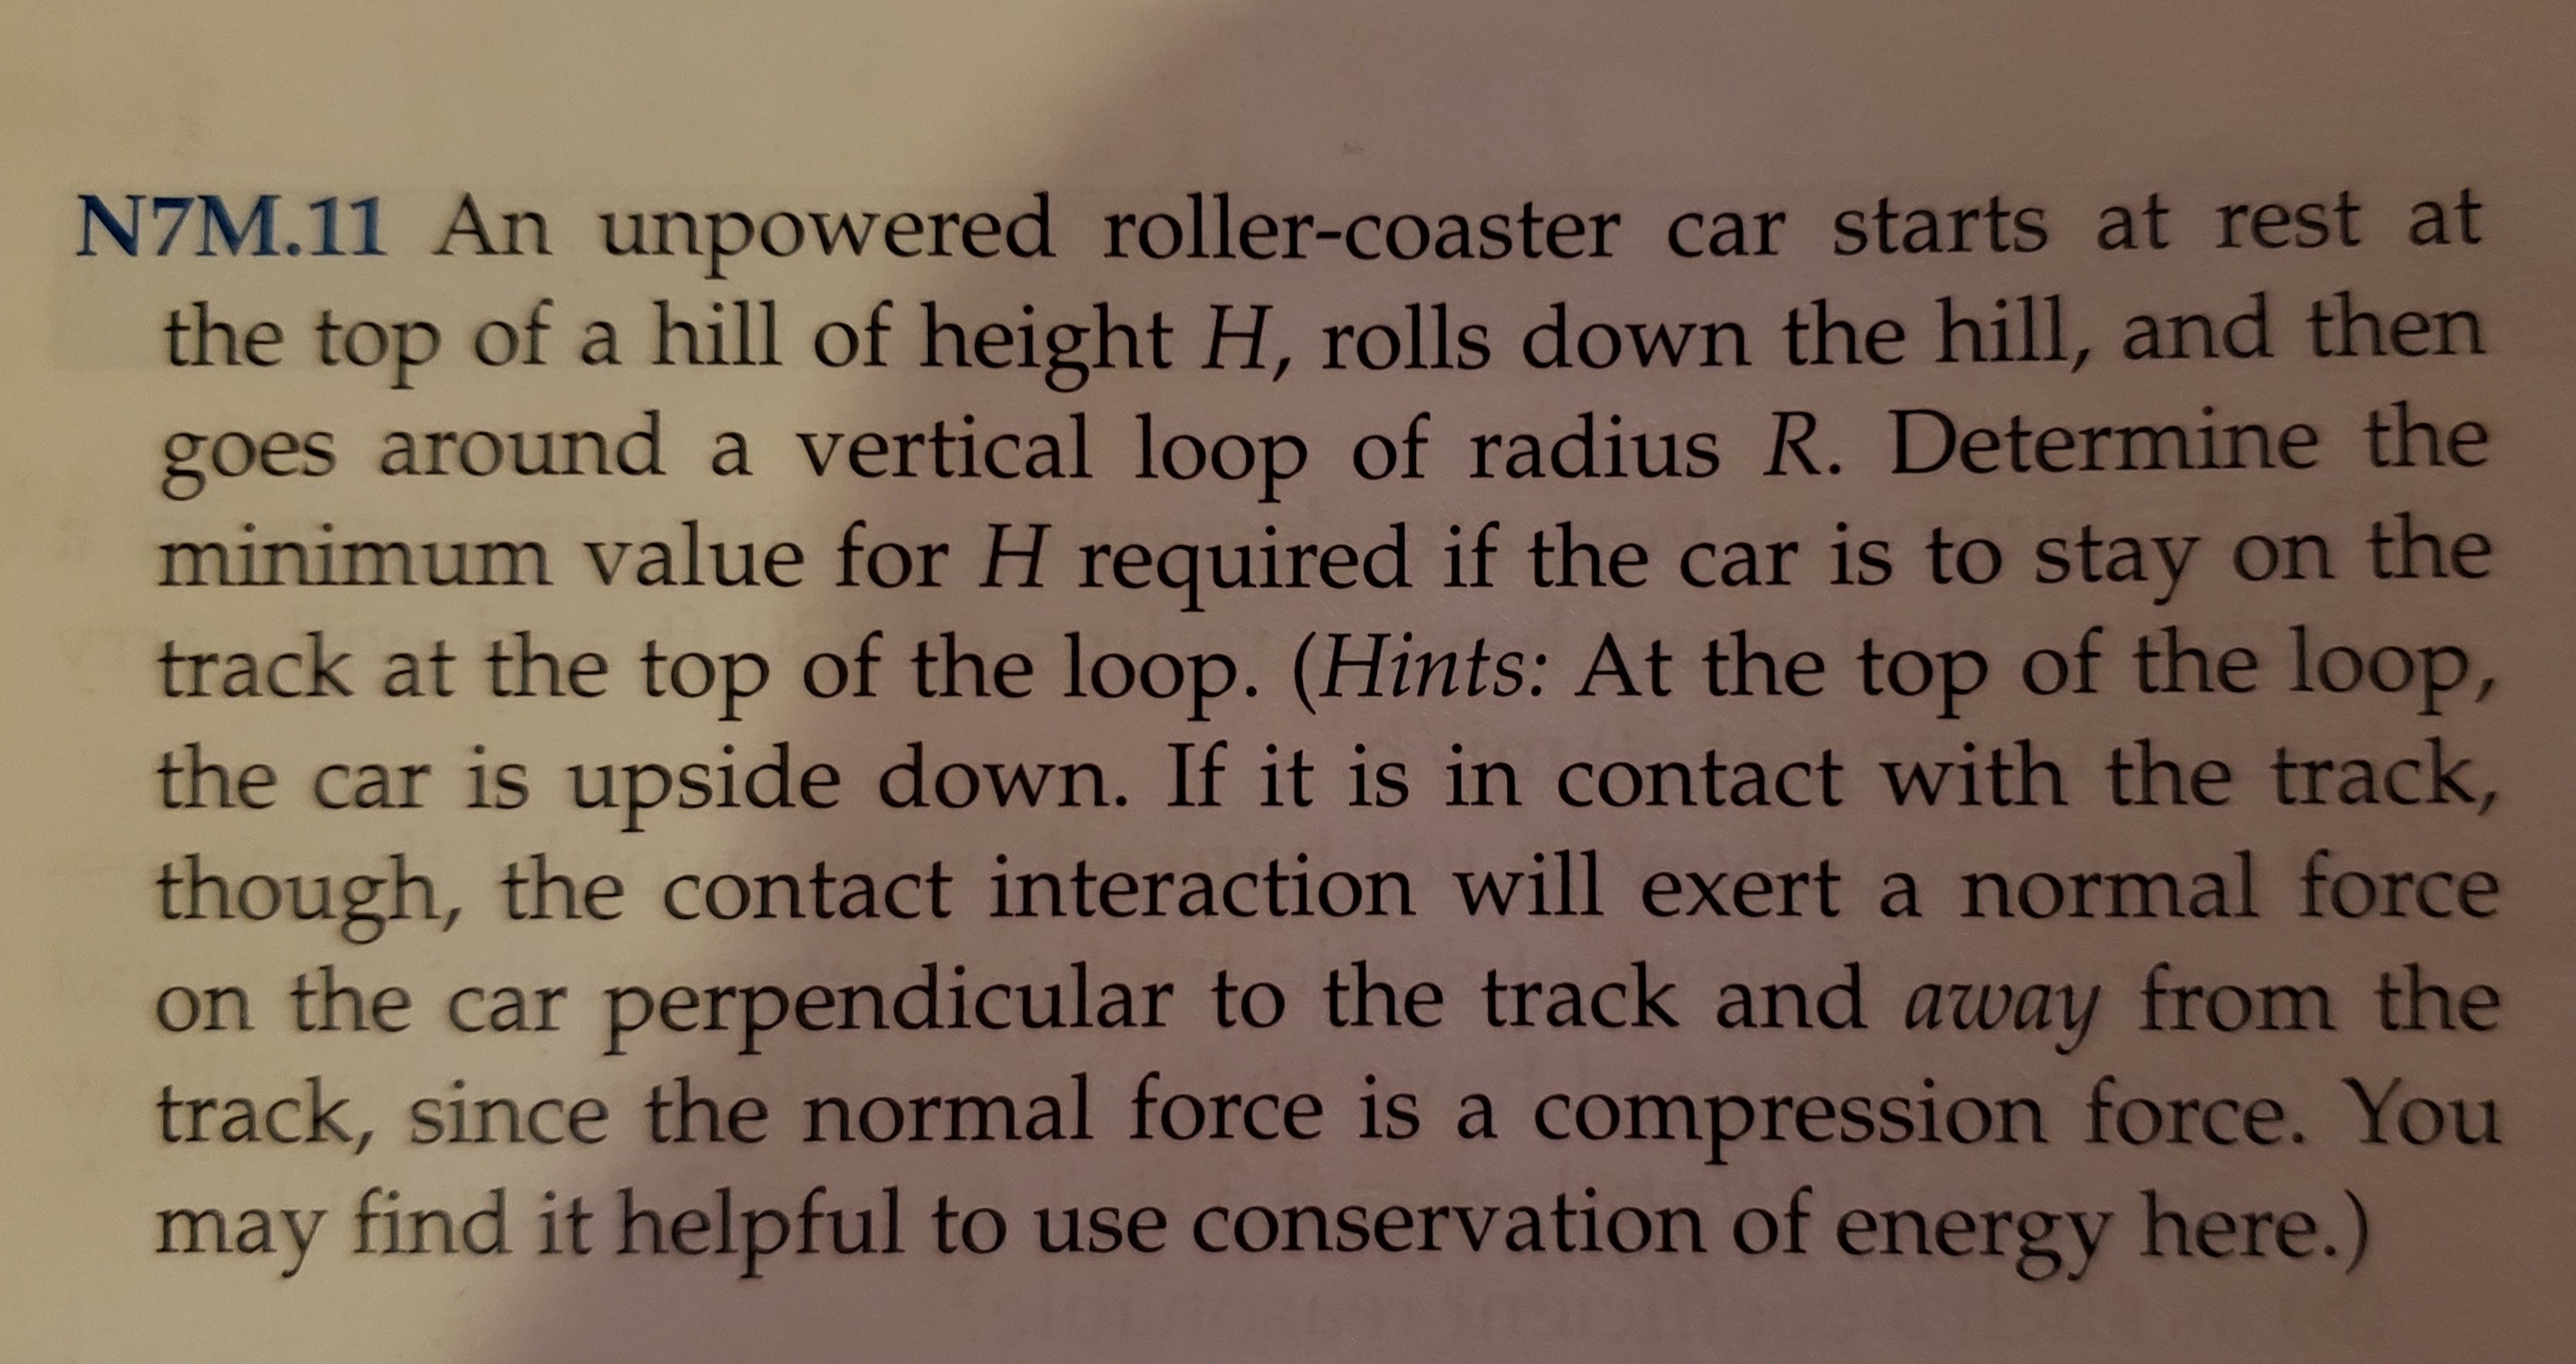 NZM.11 An unpowered roller-coaster car starts at rest at
the top of a hill of height H, rolls down the hill, and then
goes around a vertical loop of radius R. Determine the
minimum value for H required if the car is to stay on the
track at the top of the loop. (Hints: At the top of the loop,
the car is upside down. If it is in contact with the track,
though, the contact interaction will exert a normal force
on the car perpendicular to the track and away from the
track, since the normal force is a compression force. You
may find it helpful to use conservation of energy here.)
